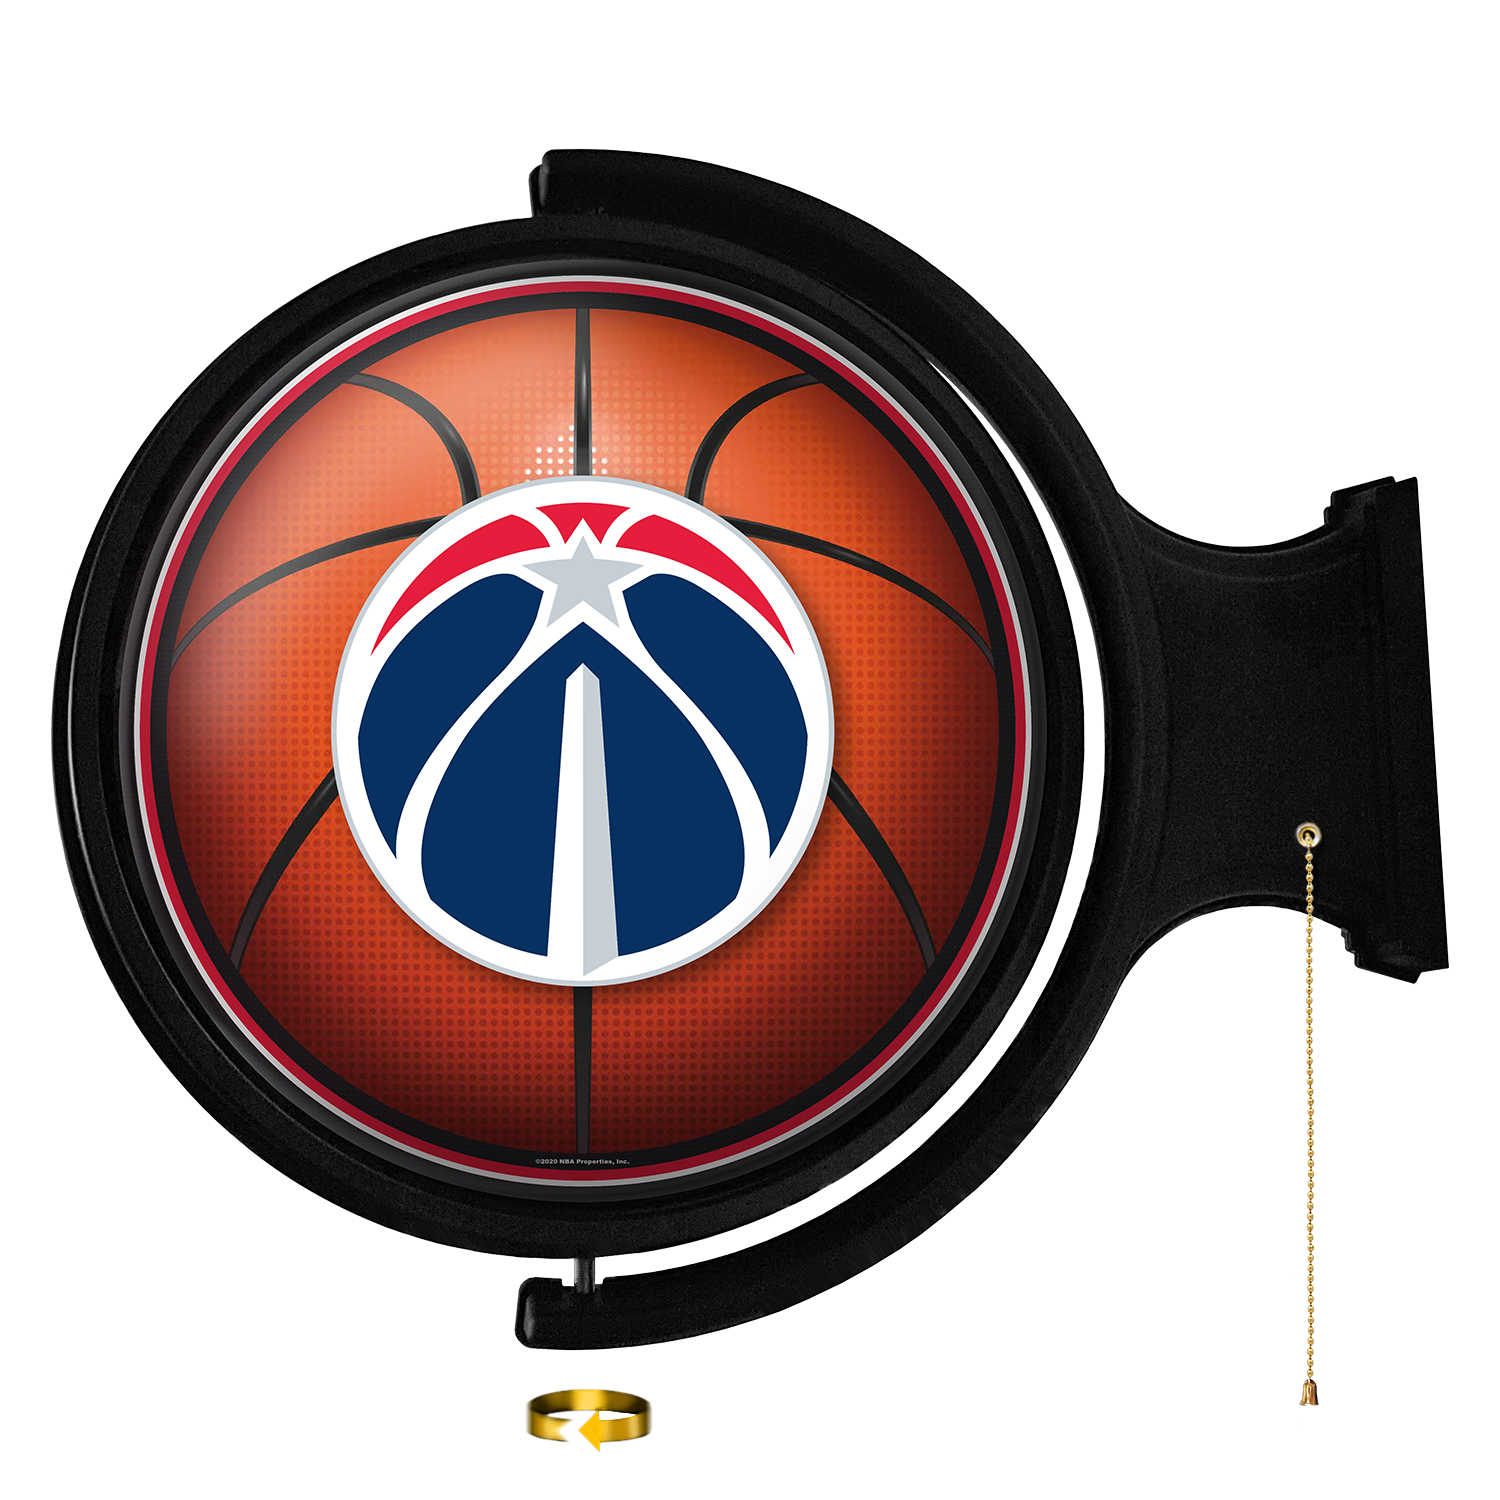 Washington Wizards: Basketball - Original Round Rotating Lighted Wall Sign - The Fan-Brand